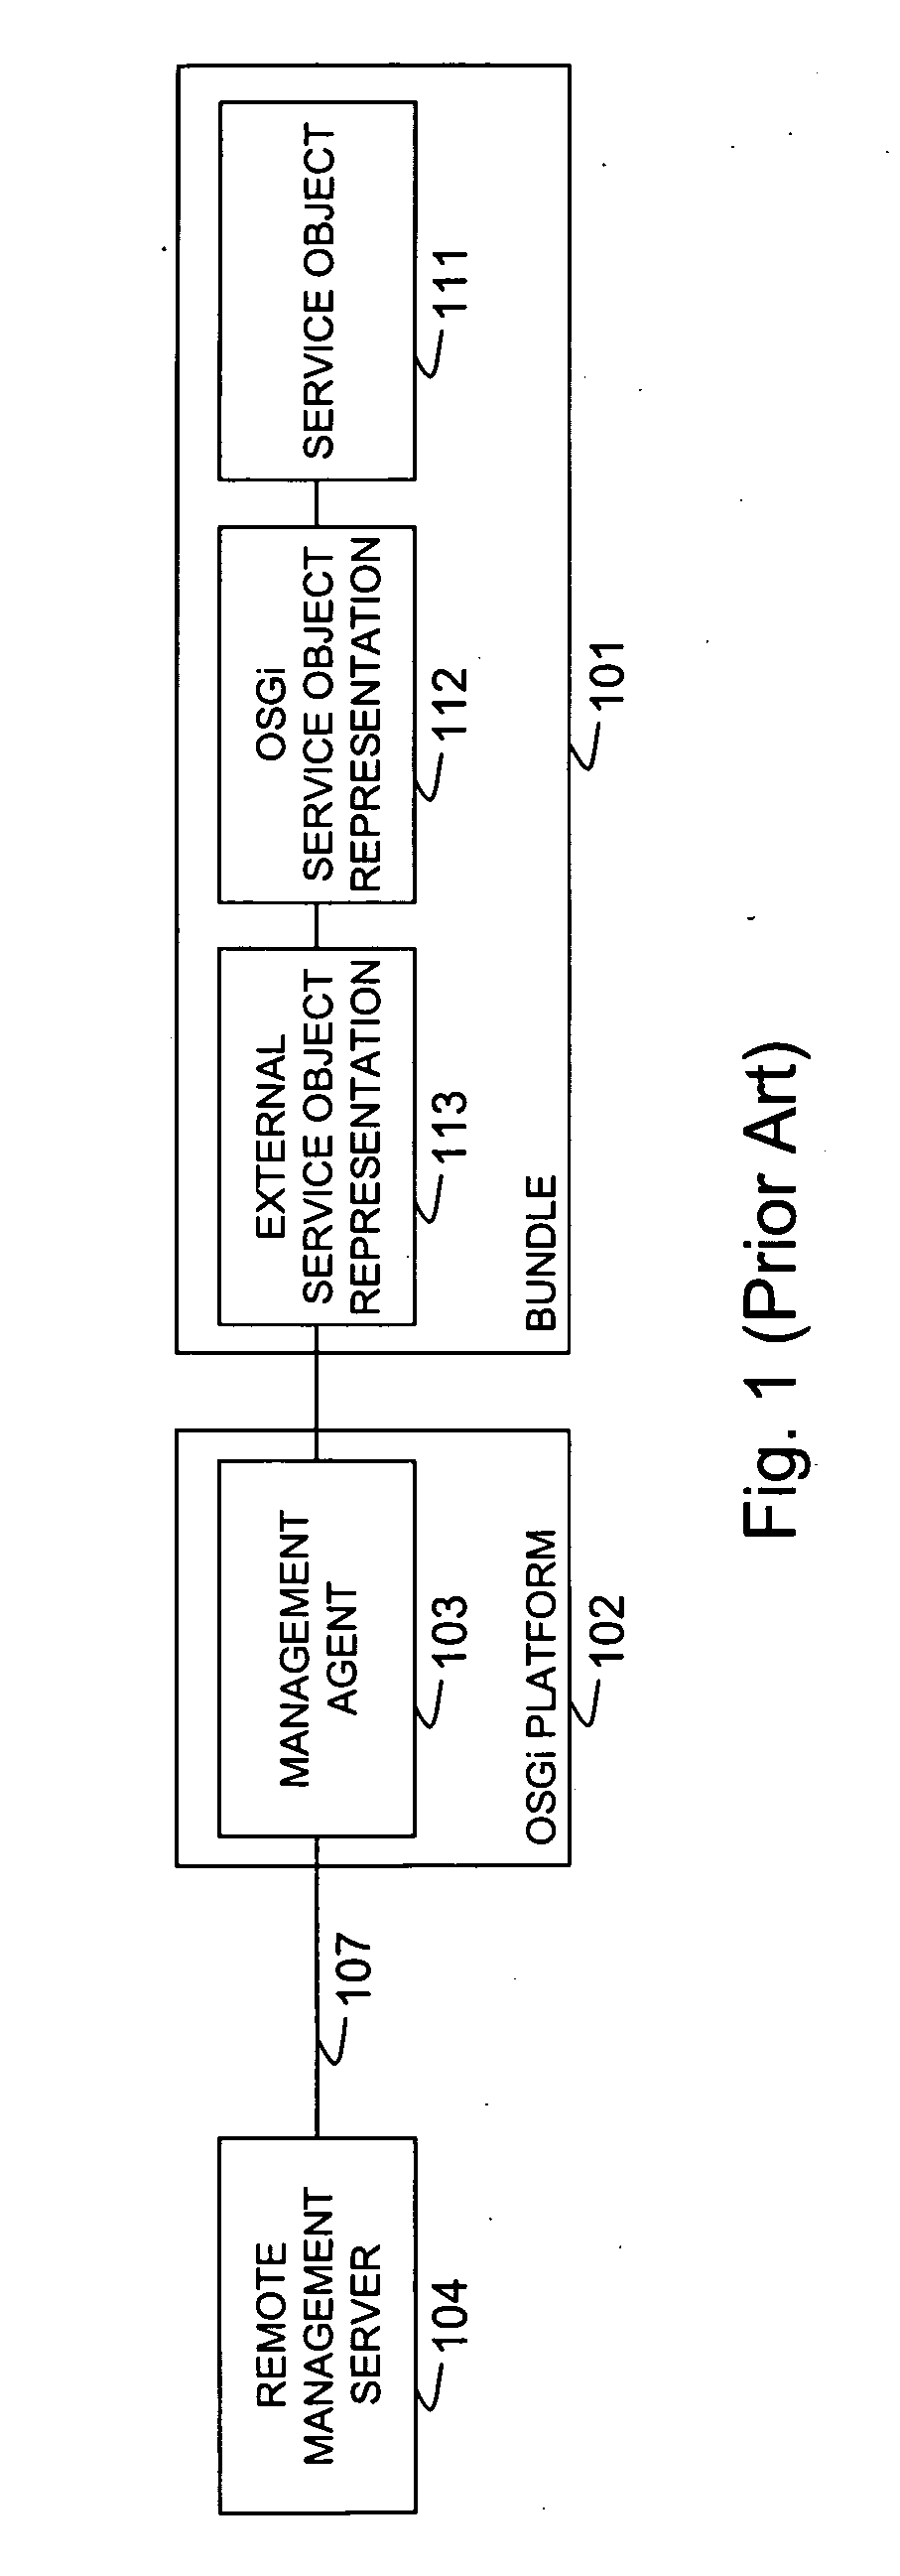 Remote management system and method for service objects